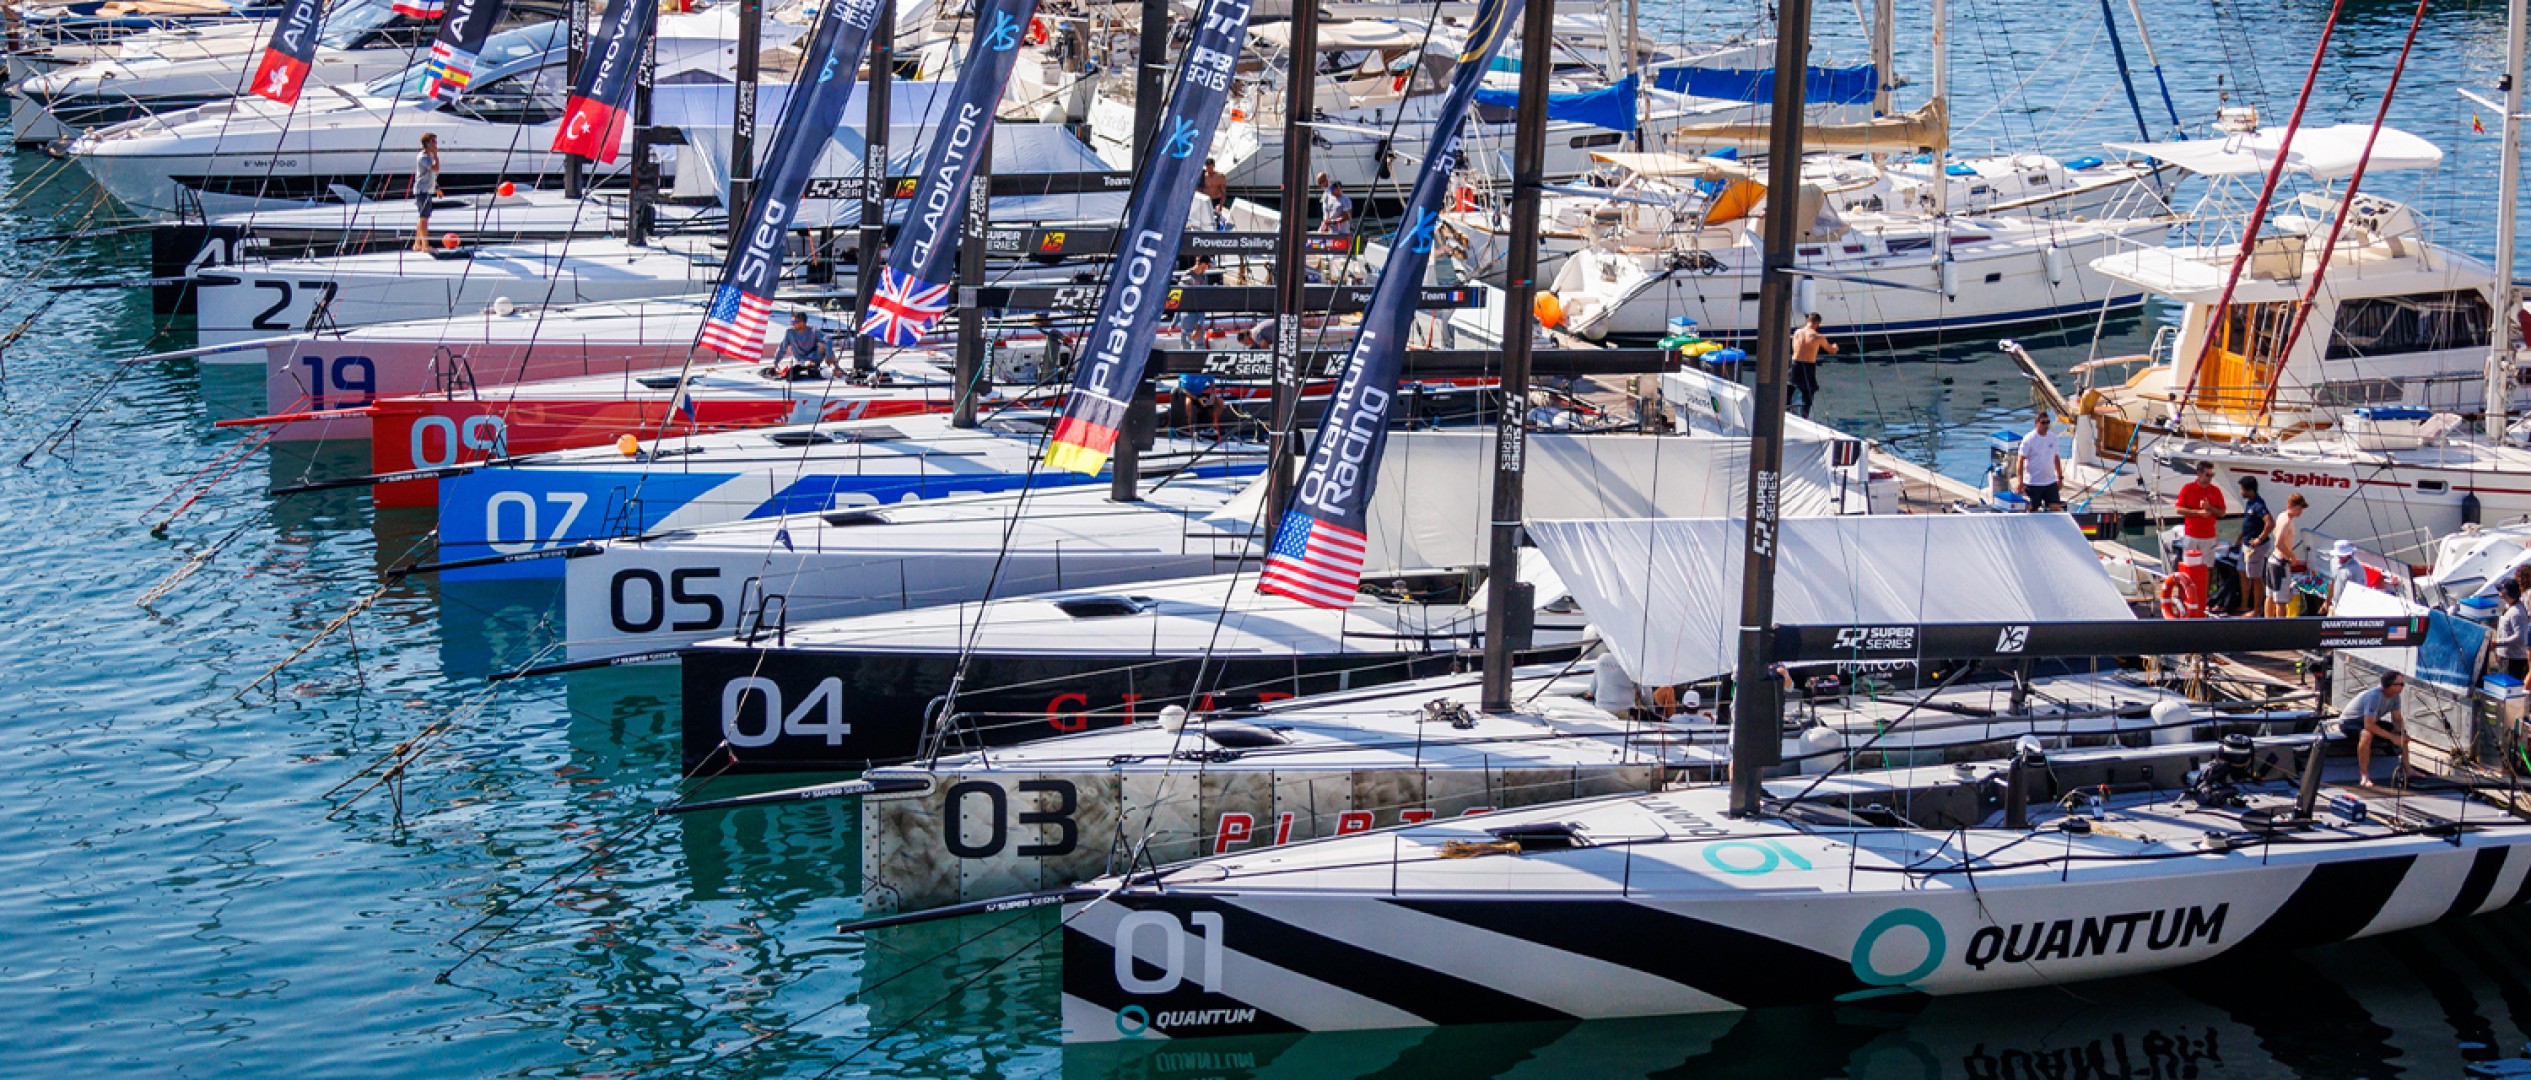 52 Super Series: ready to race for the Royal Cup in Menorca